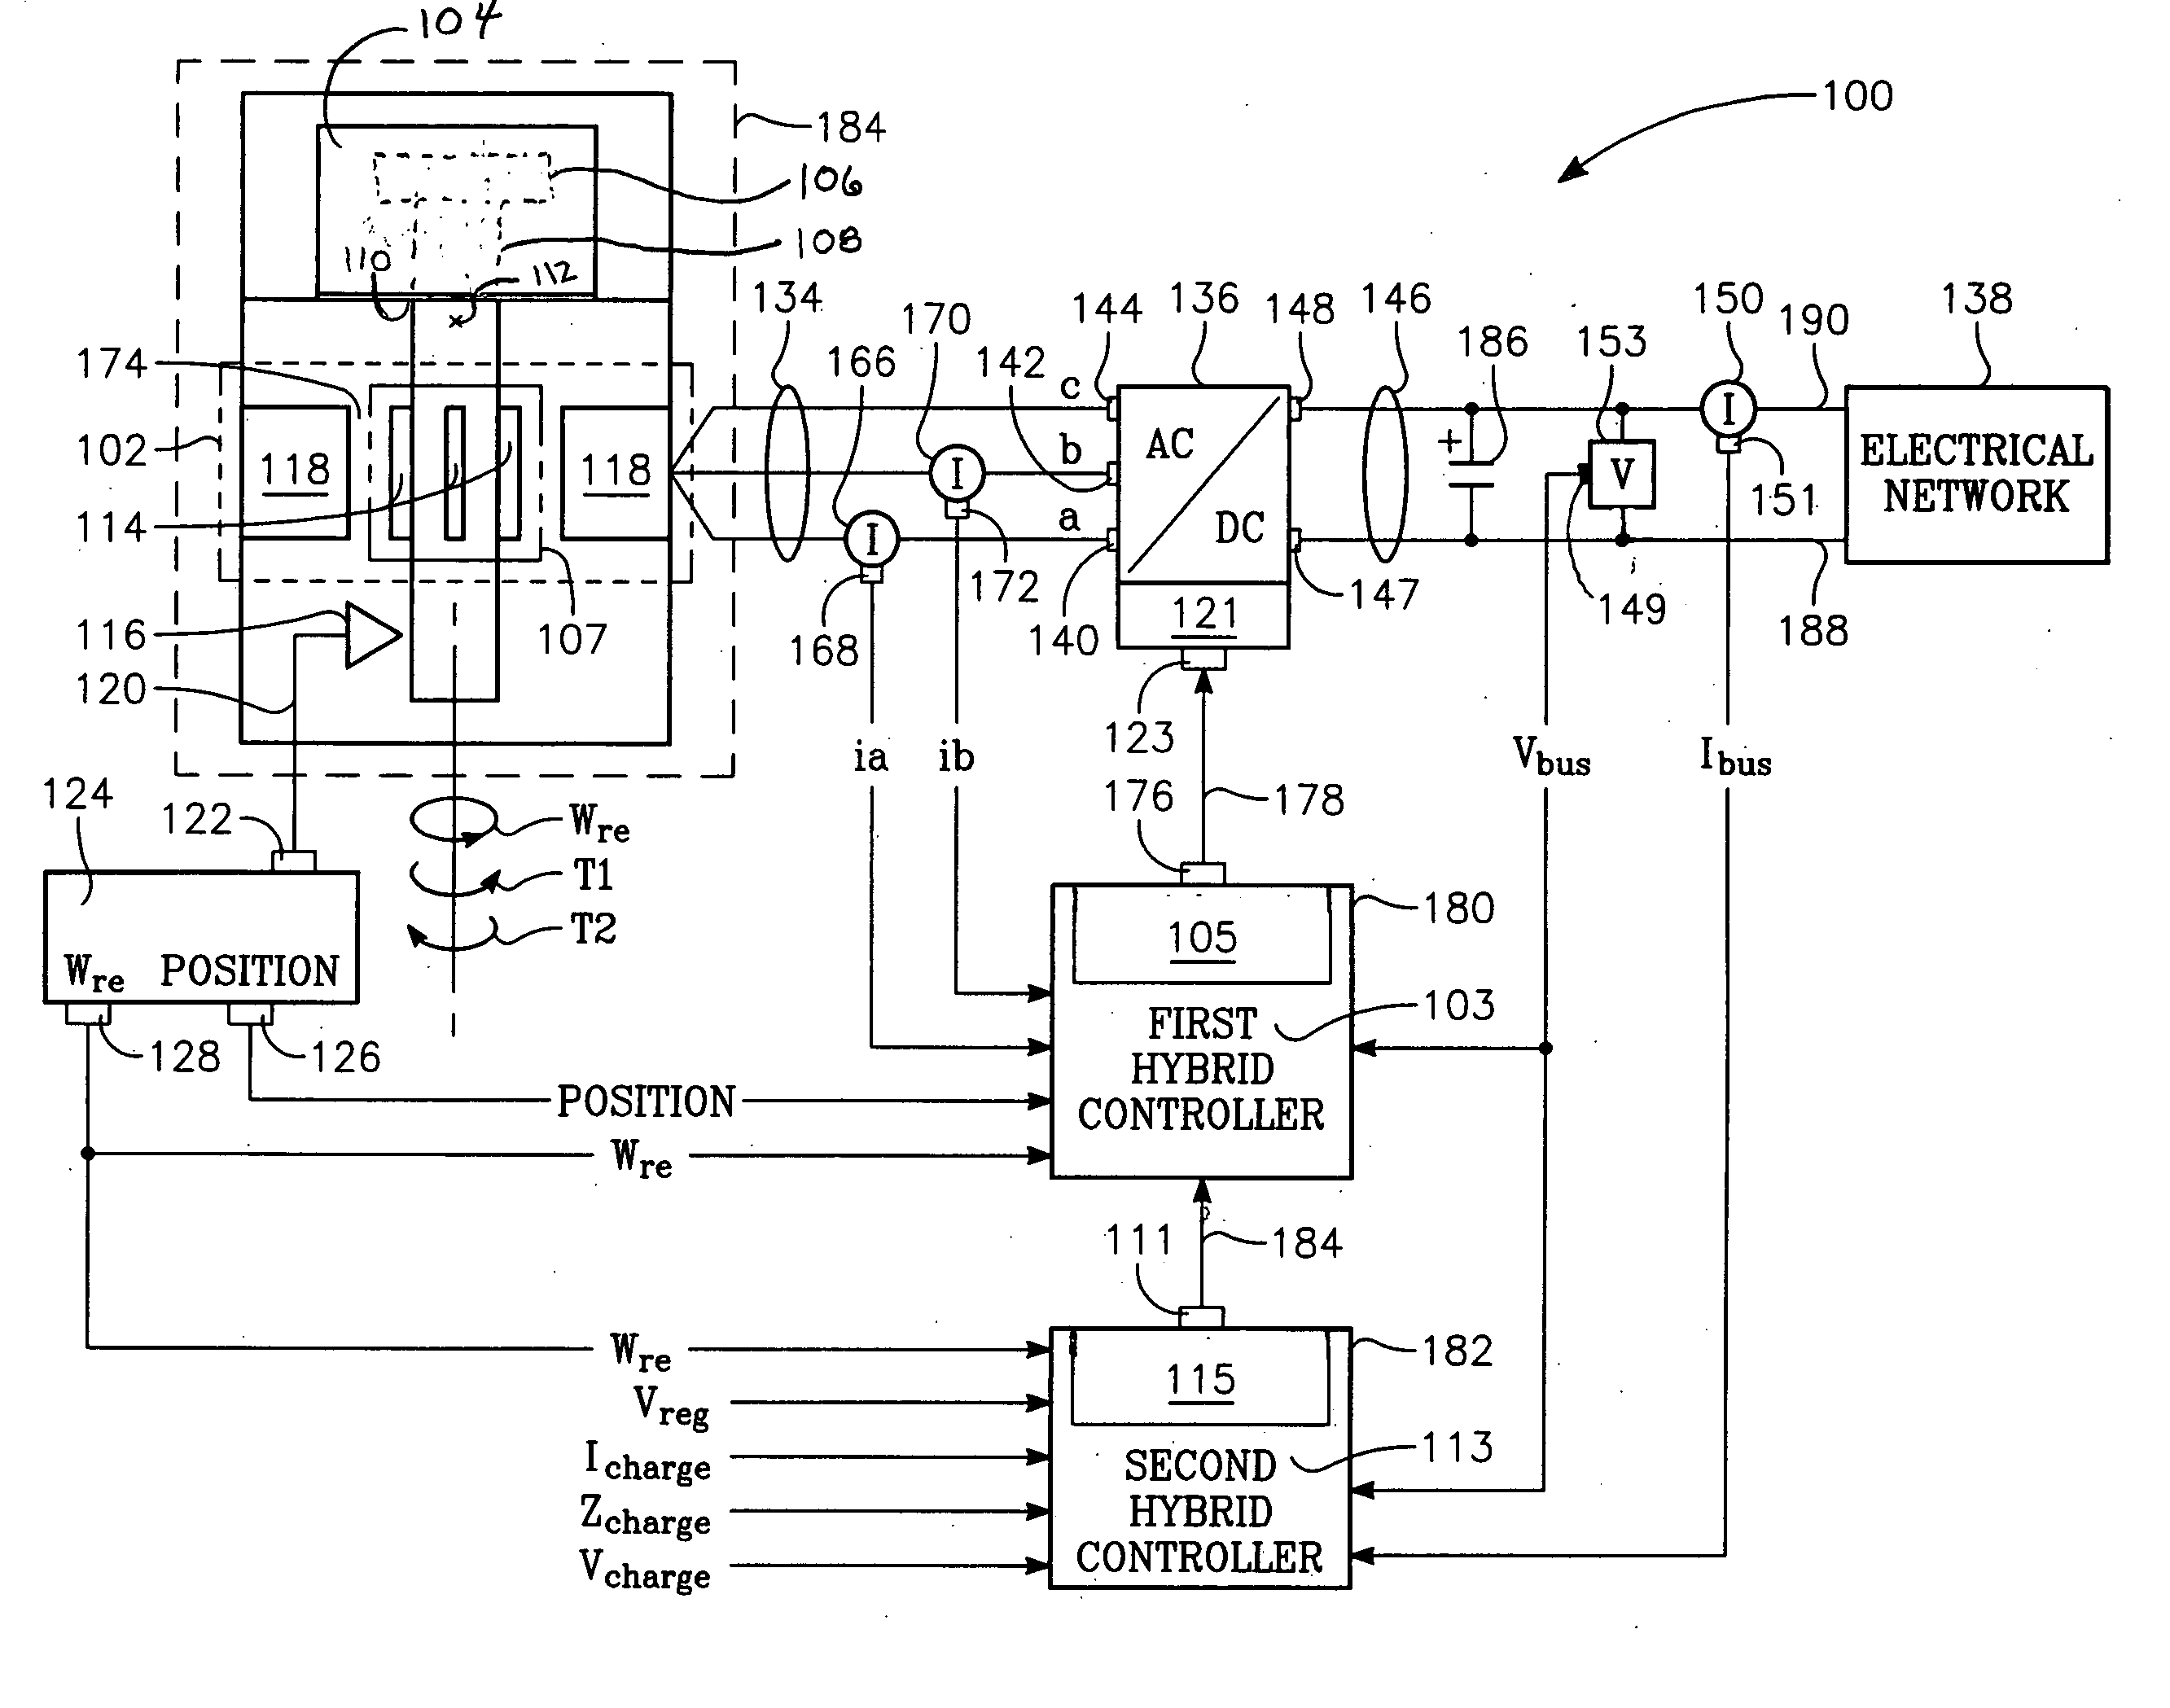 Feedforward controller for synchronous reluctance machines